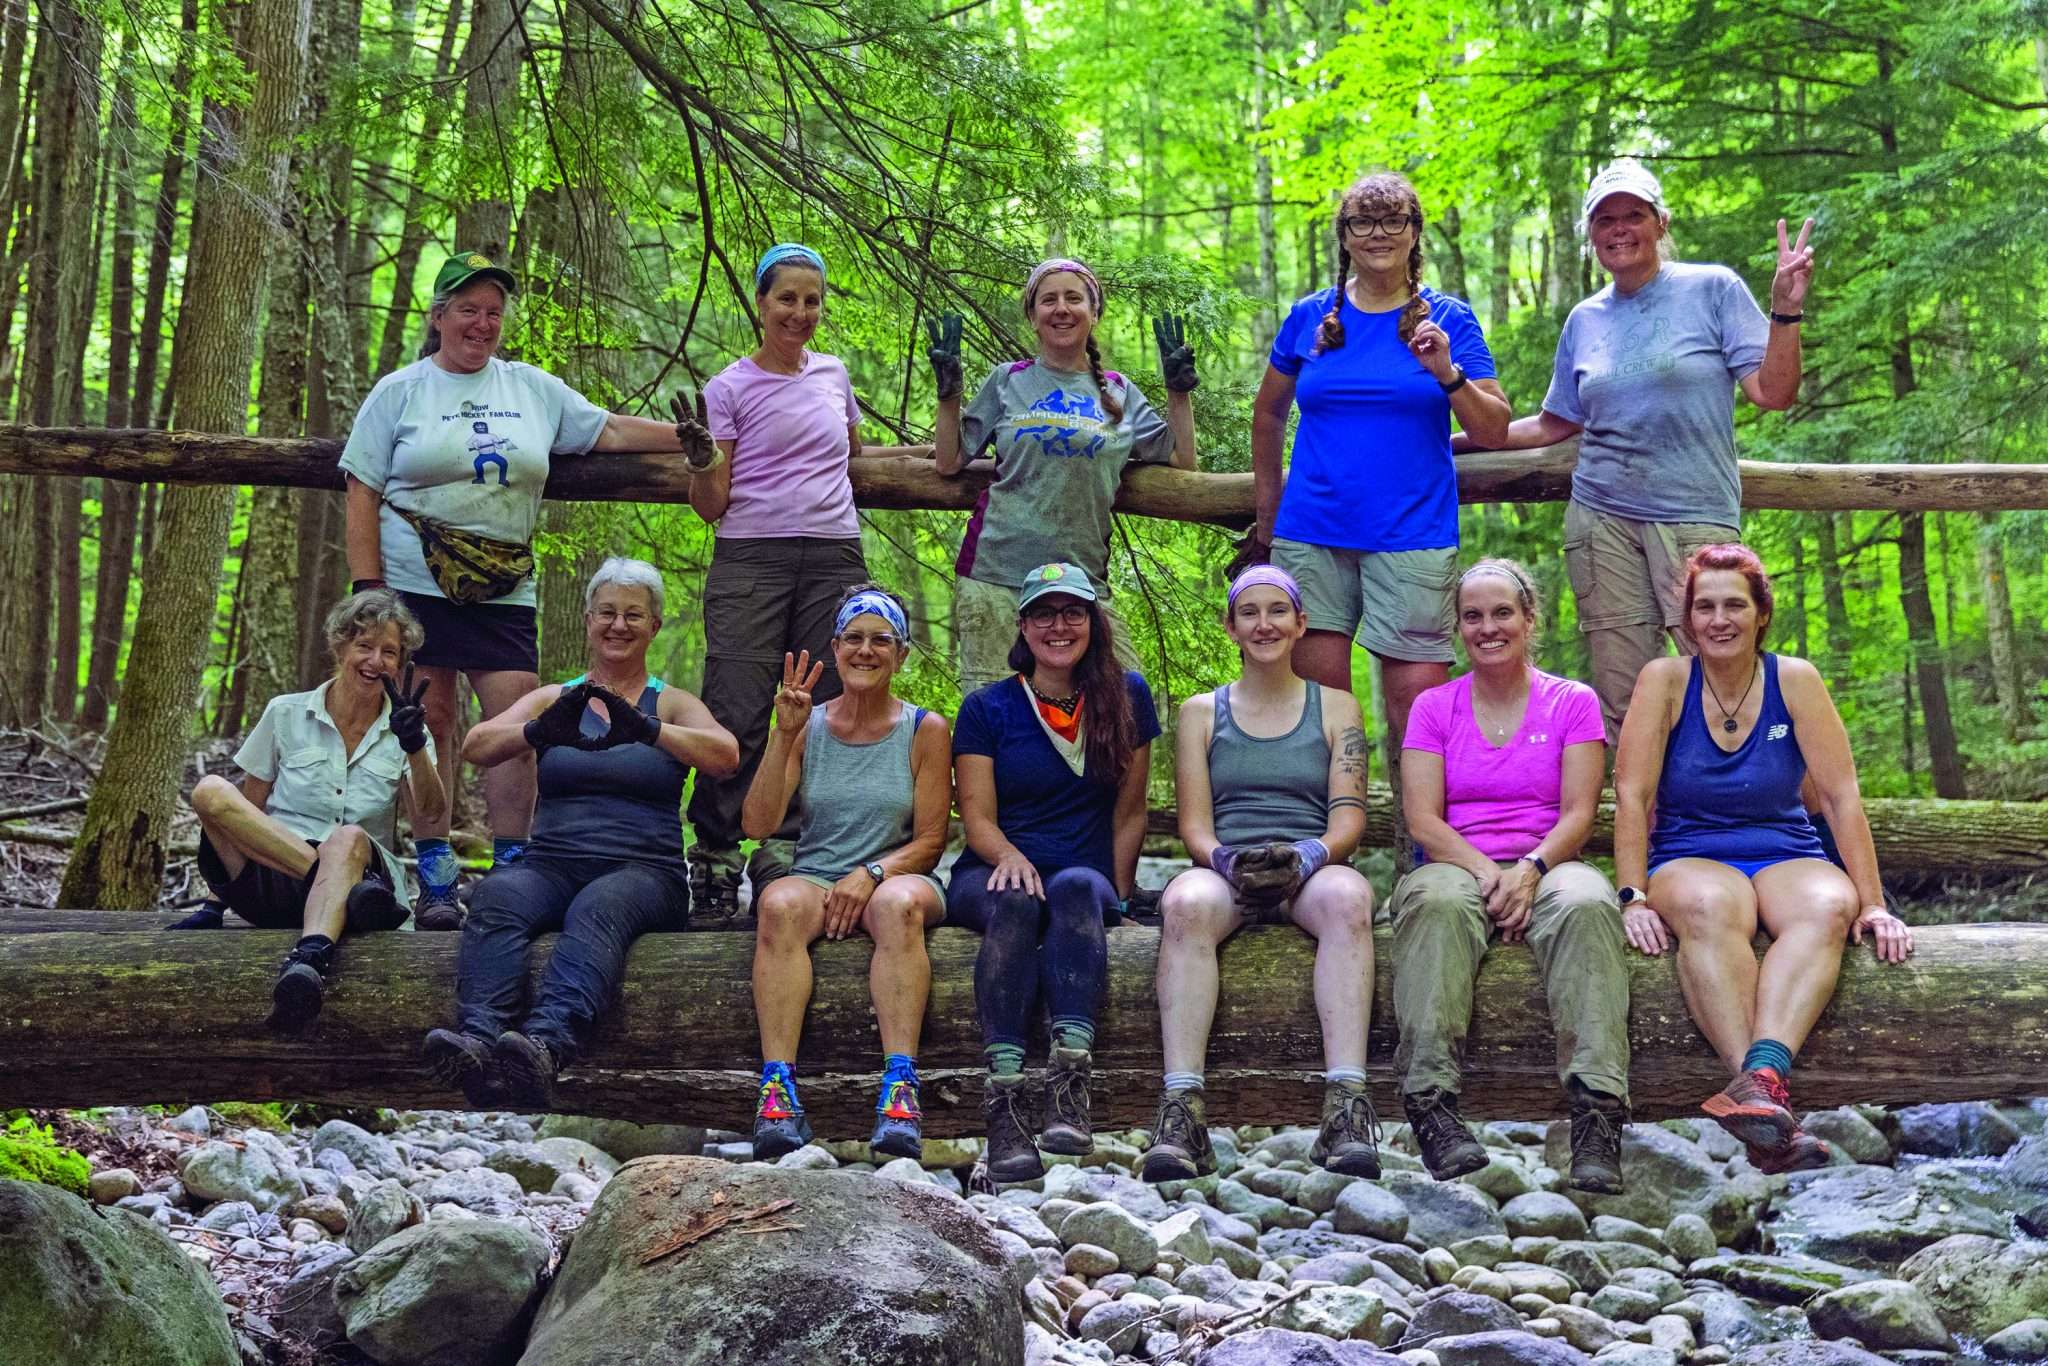 Women of the '46 on a work trip in the Central Adirondacks